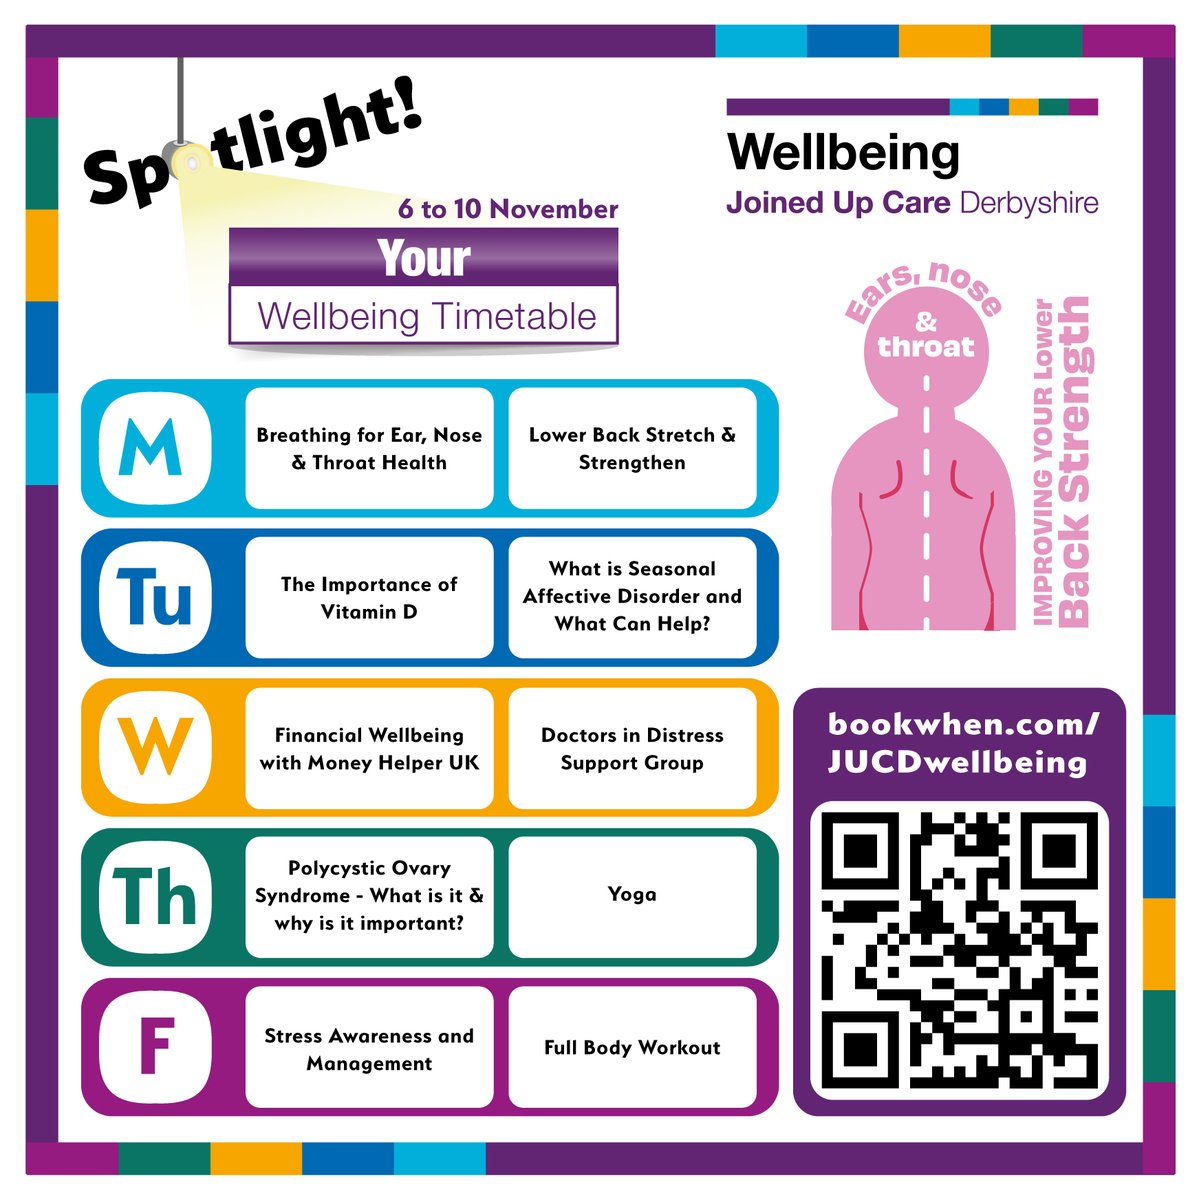 Your Wellbeing Team has a range of support sessions running throughout #InternationalStressAwarenessWeek to support colleagues who may be feeling stressed:

🫂 Stress Awareness & Management
🧘‍♀️ Yoga
🗣️💙Support Group
💰 Financial Wellbeing

View/book➡️ bookwhen.com/jucdwellbeing